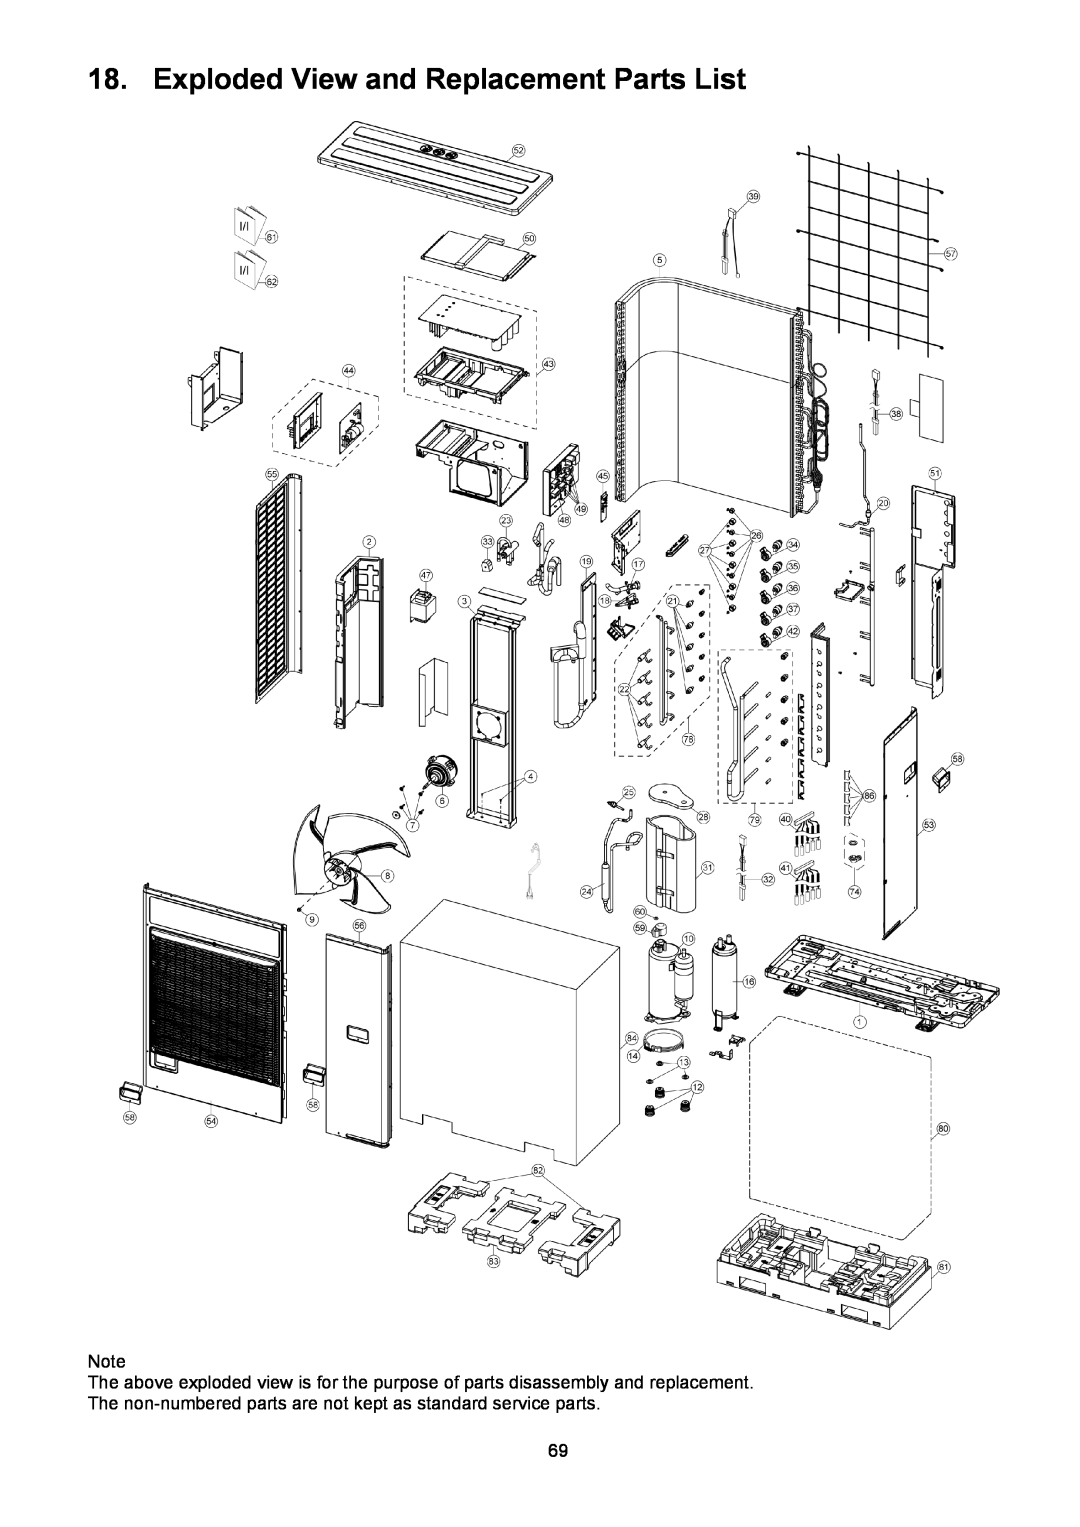 Panasonic CU-5E36QBU service manual Exploded View and Replacement Parts List 